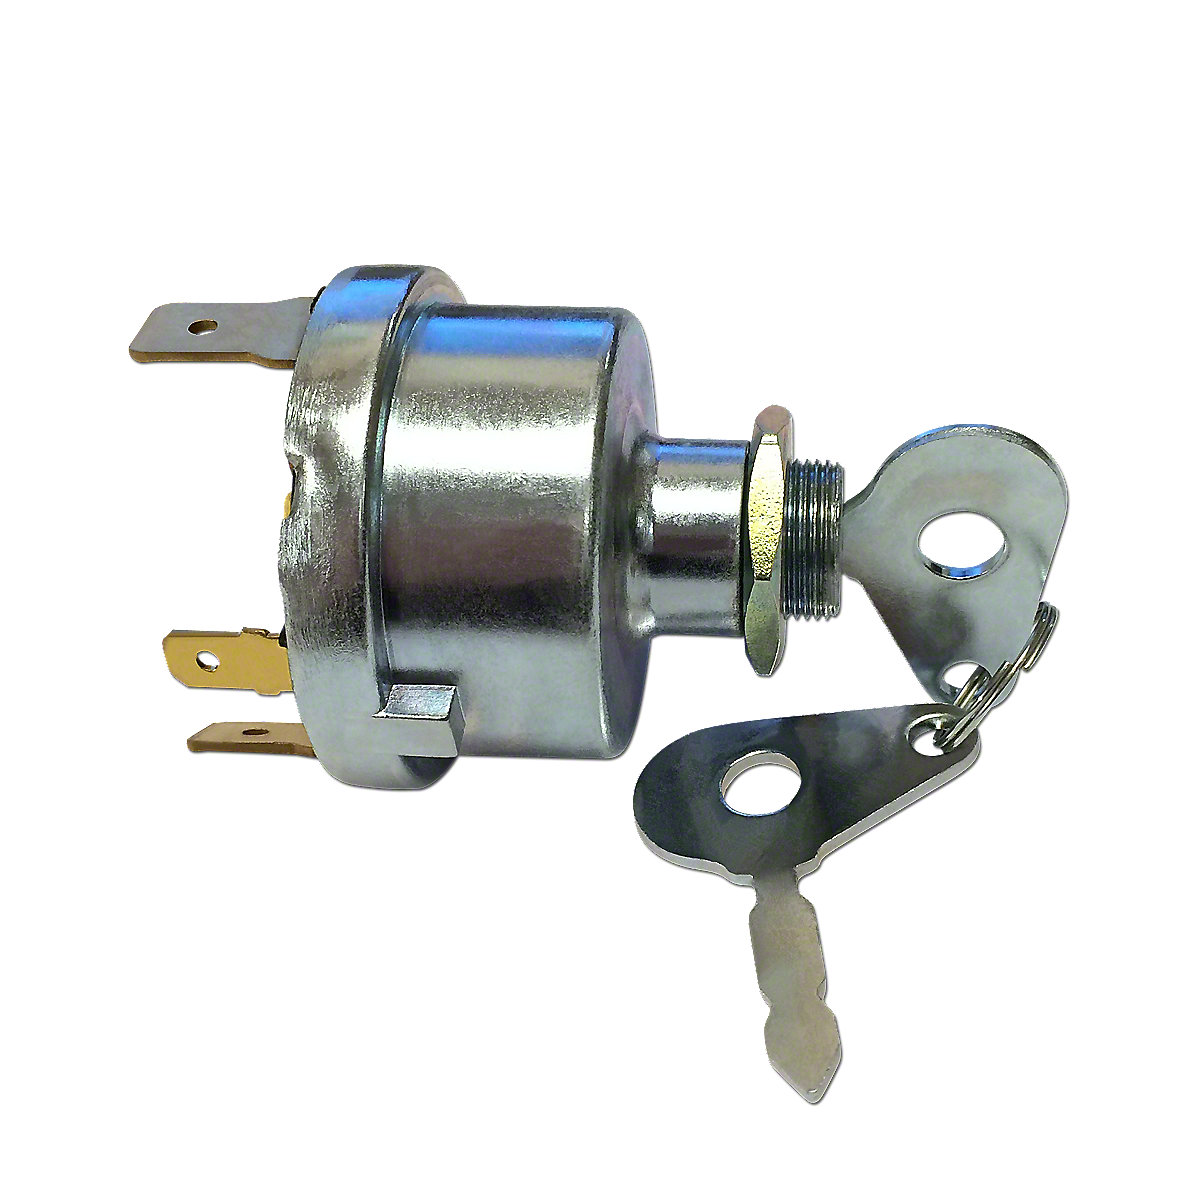 International Harvester Ignition Switch with six prongs and two keys.